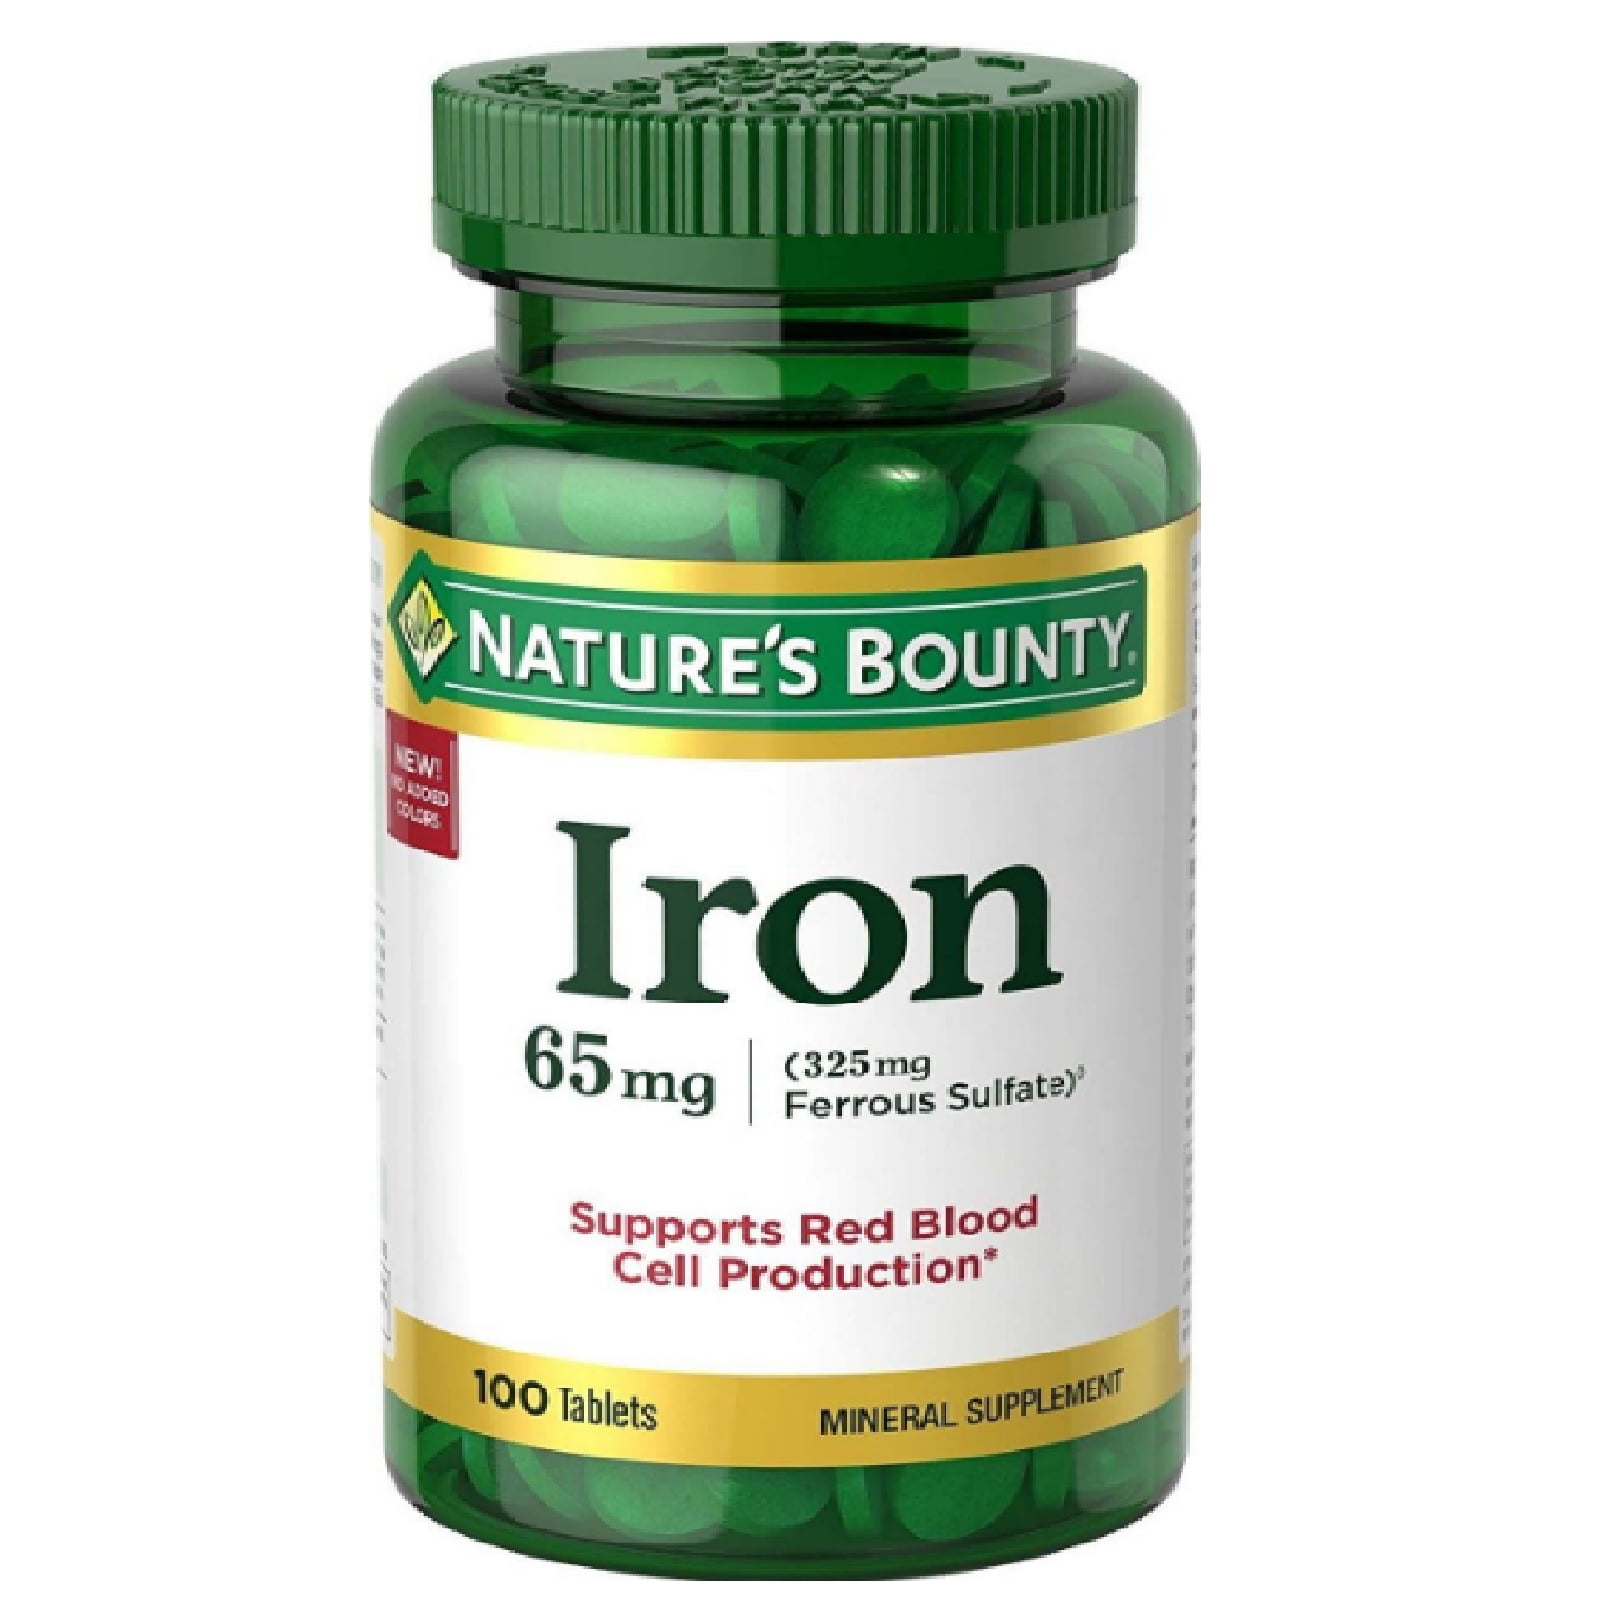 Iron Supplement: Nature's Bounty 65mg, 100 Tablets